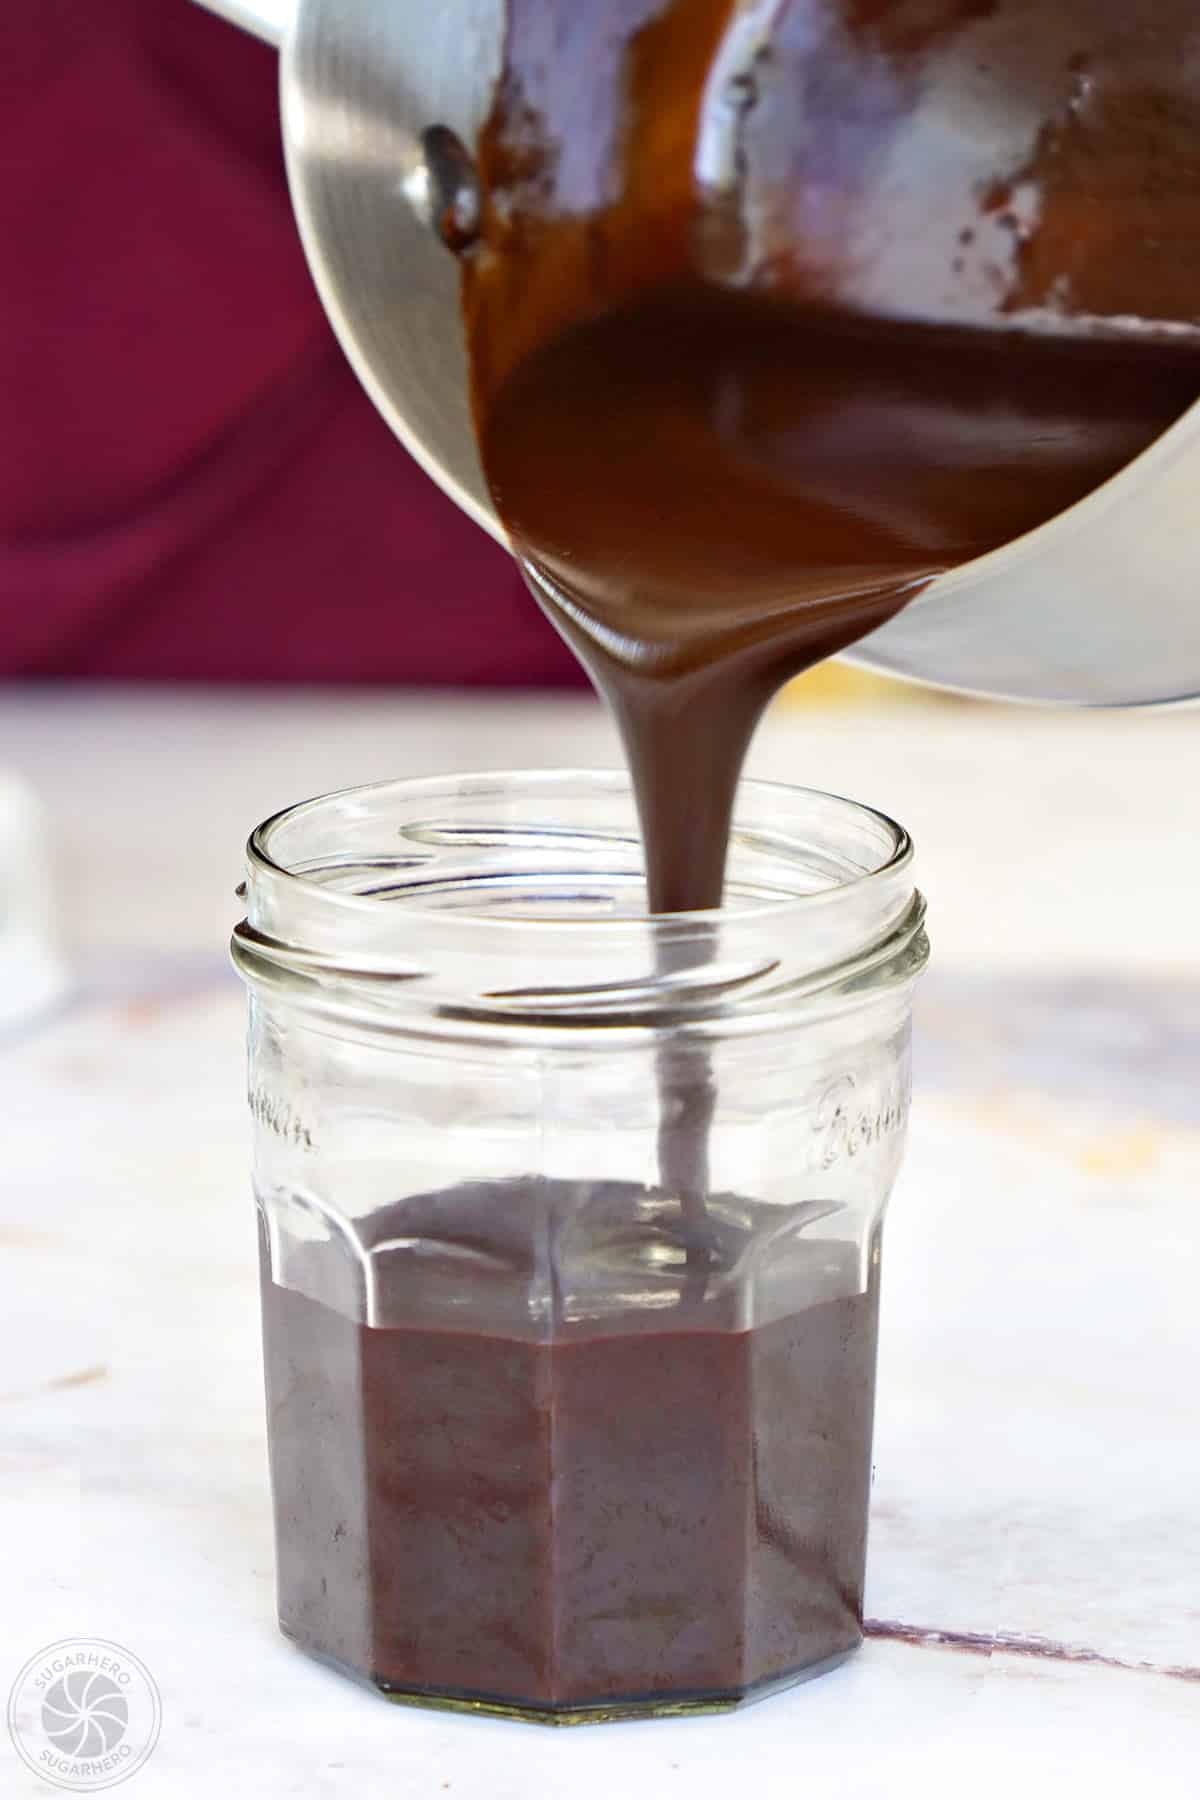 Hand pouring chocolate spread into a small glass jar.